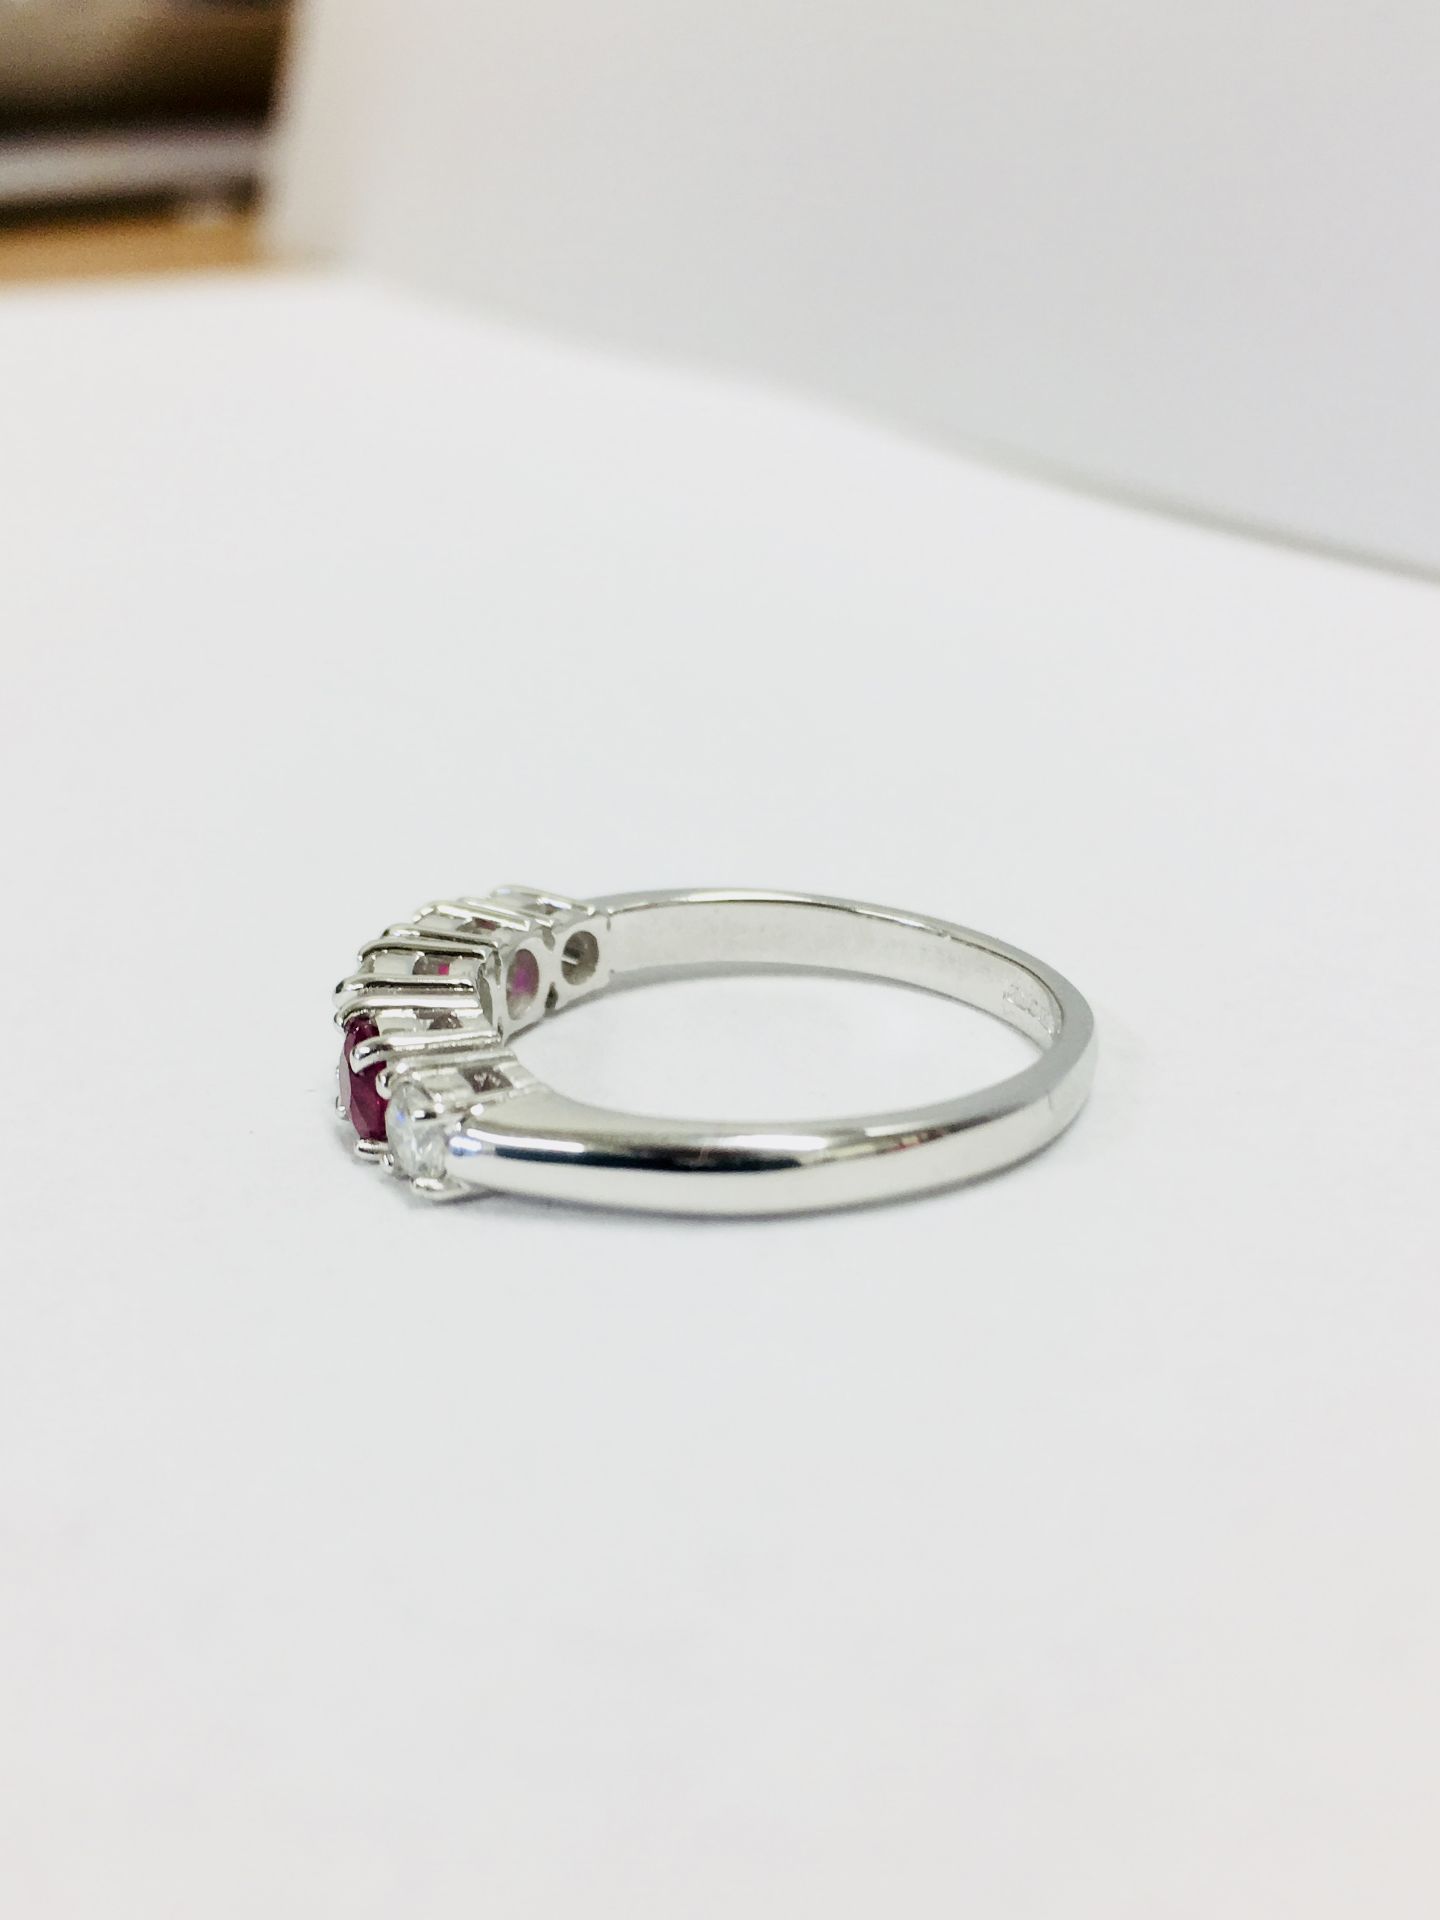 0.75Ct Ruby And Diamond Five Stone Ringset In 18Ct Gold. - Image 3 of 7